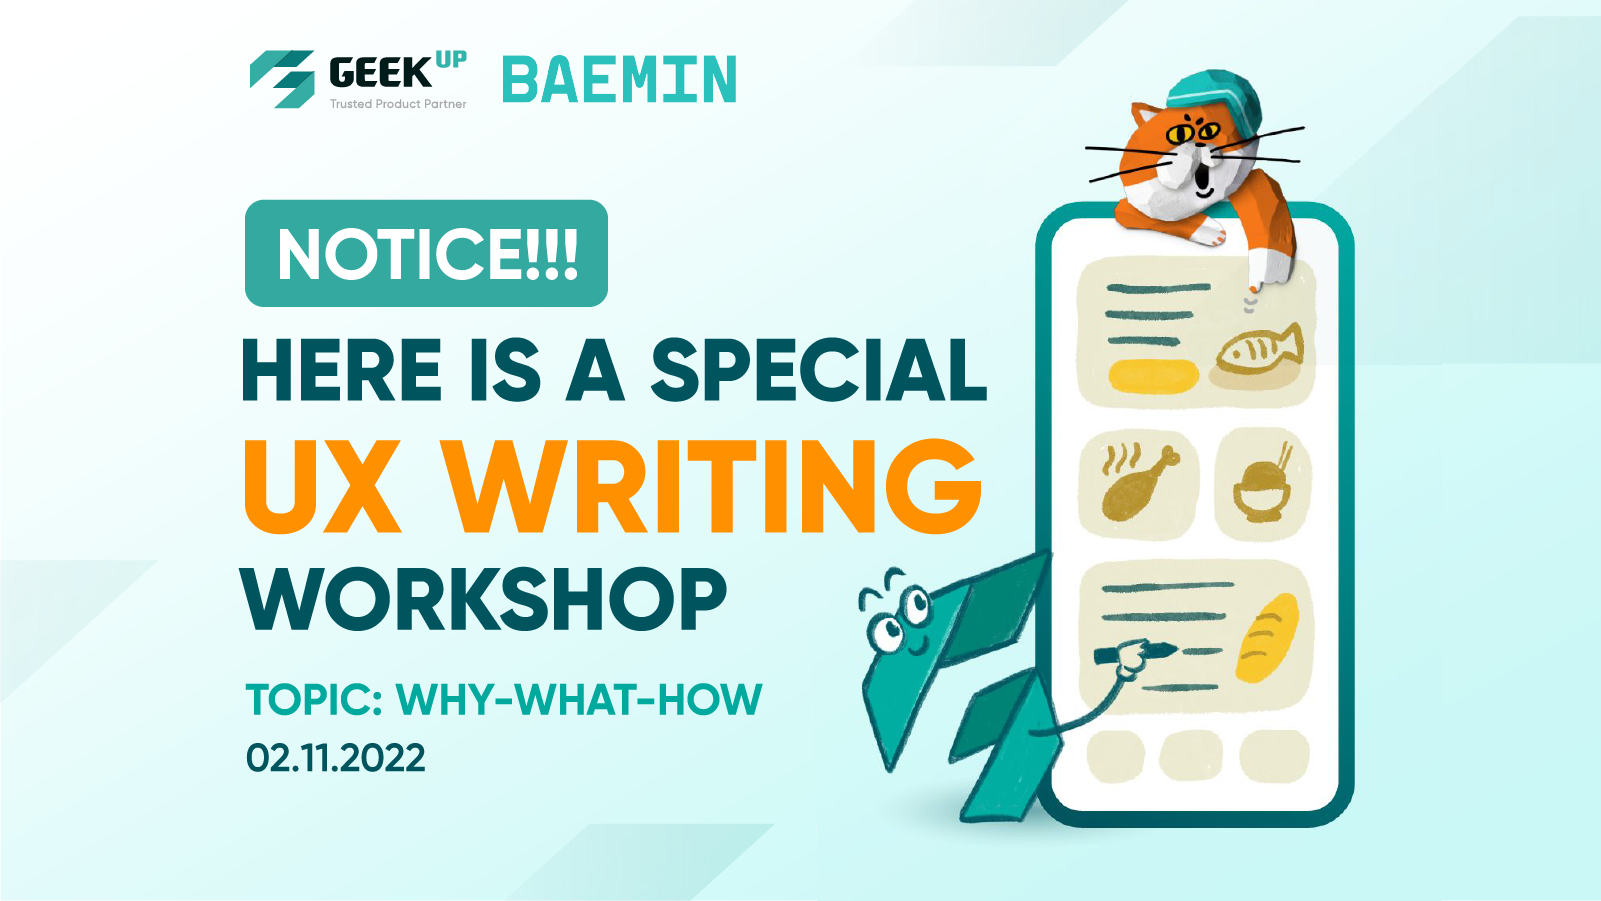 GEEK Up cooperates with BEAMIN to organize workshop “UX Writing: Why - What - How”